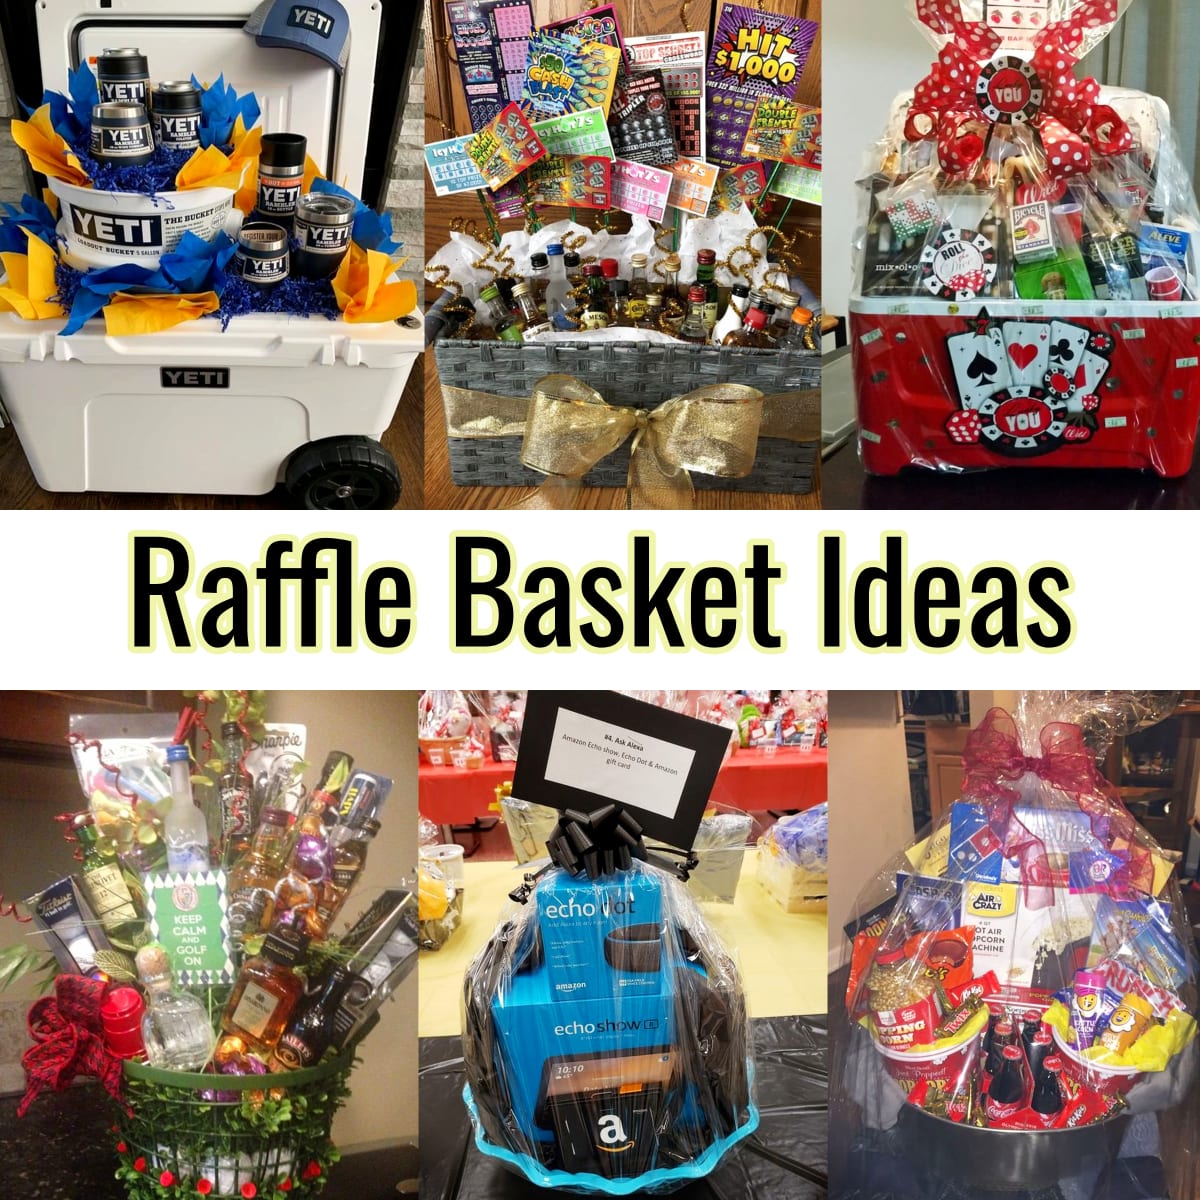 raffle basket ideas for fundraiser, benefits, adult silent auctions at school, church or work, jack and jill raffle, tricky tray basket ideas for penny auction basket raffles and other charity event - lottery ticket, fall, beach, coffee, baking, outdoor, candy, fitness, camping, wine cooler, date night, lottery scratch off ticket, YETI cooler and more themed creative silent auction items and pictures of raffle basket ideas